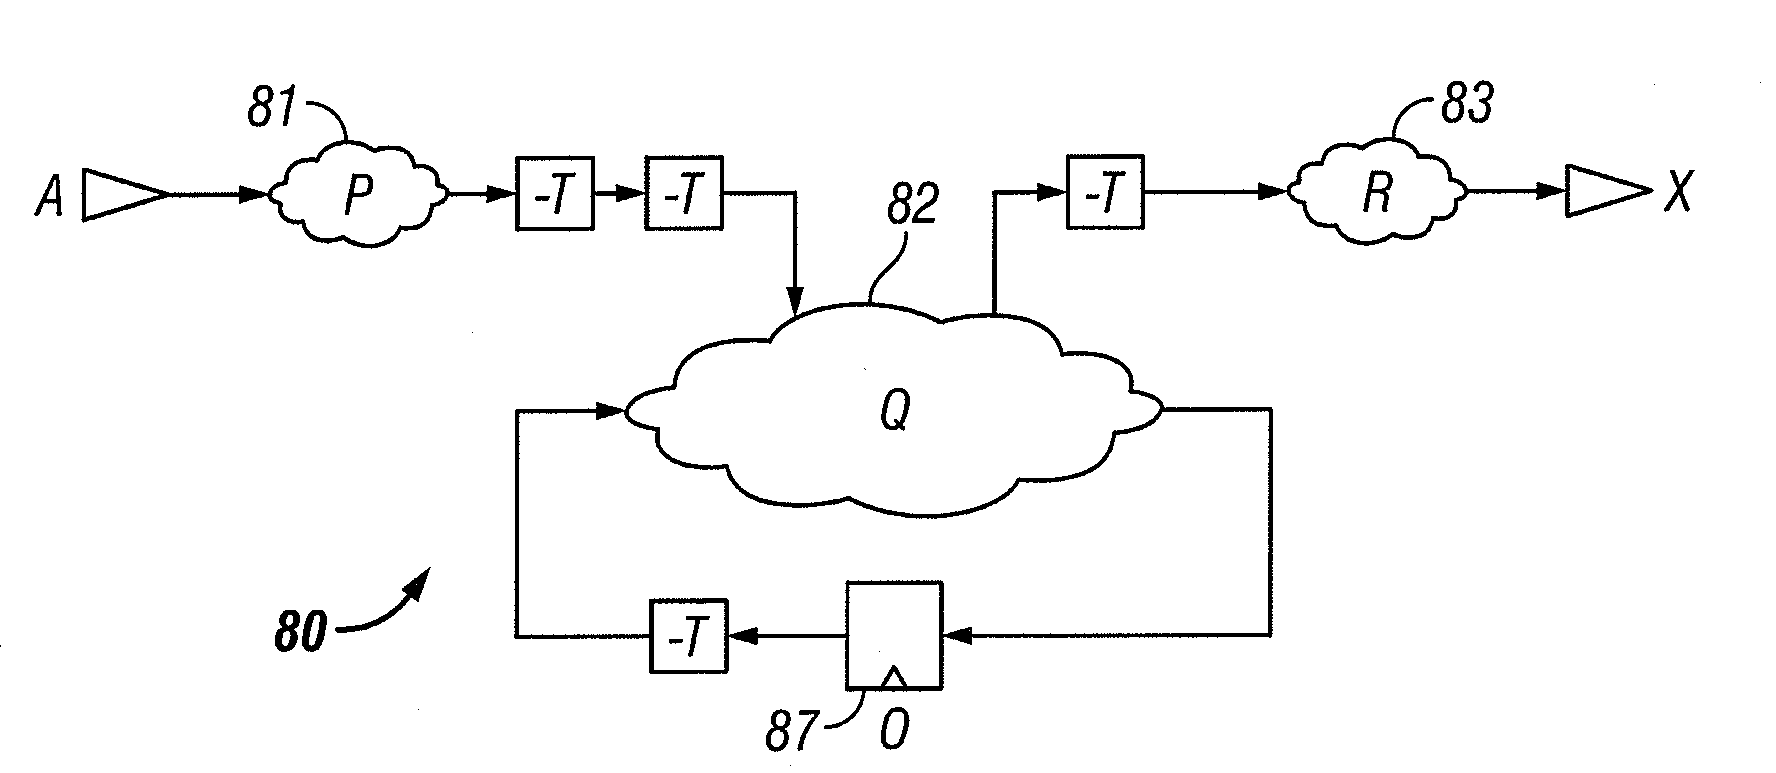 Method for generating optimized constraint systems for retimable digital designs